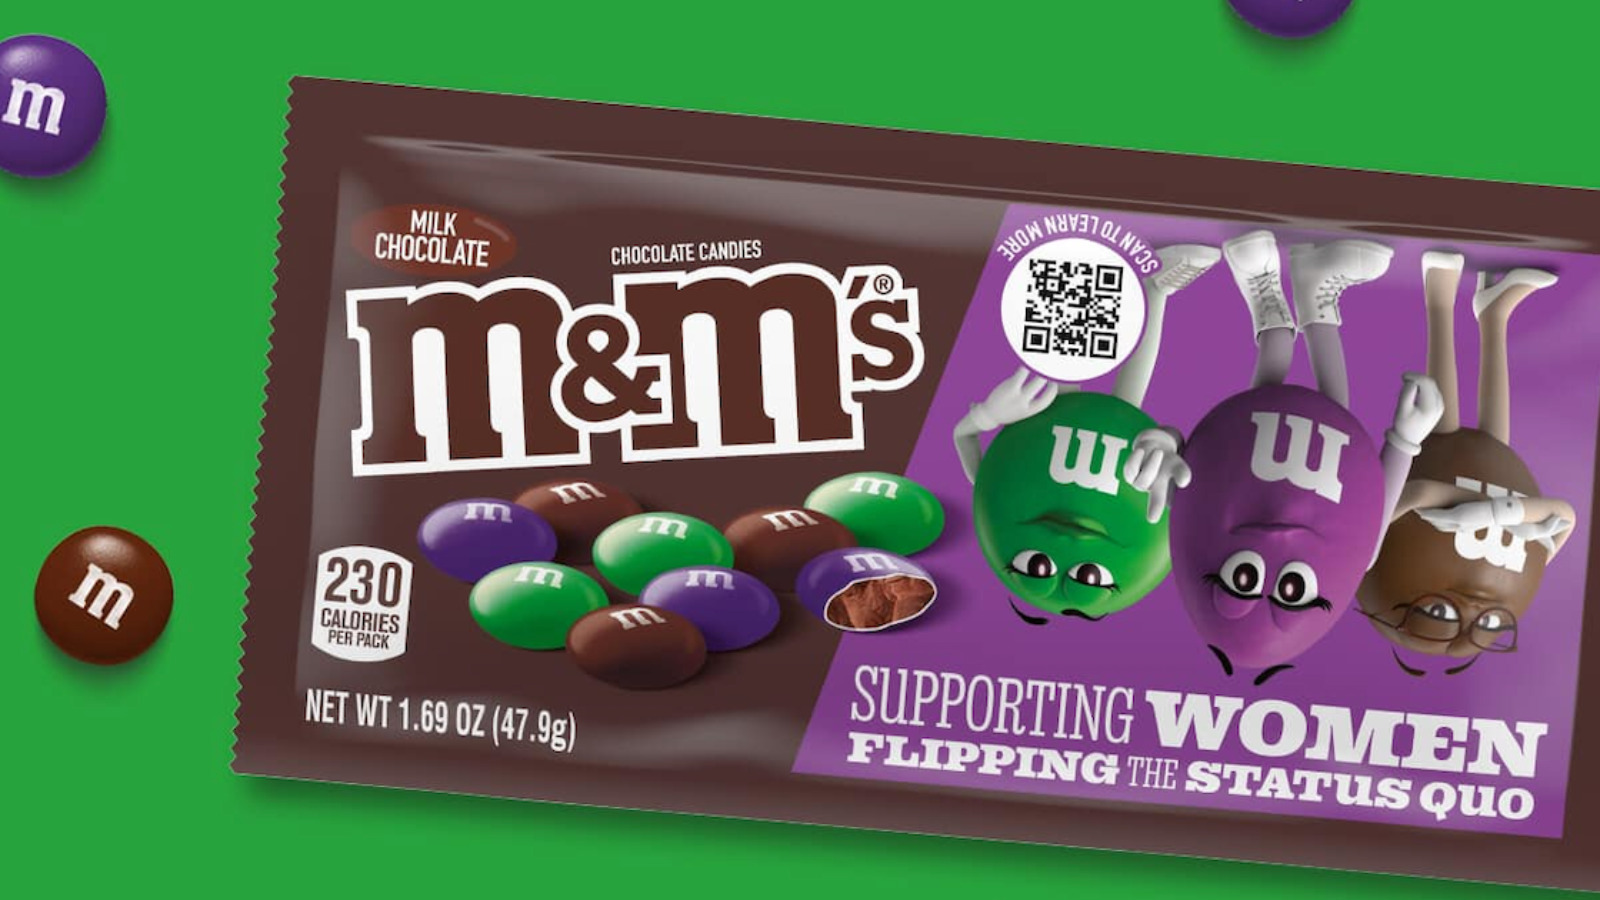 Mars Preps for International Women's Day With Limited Edition M&M